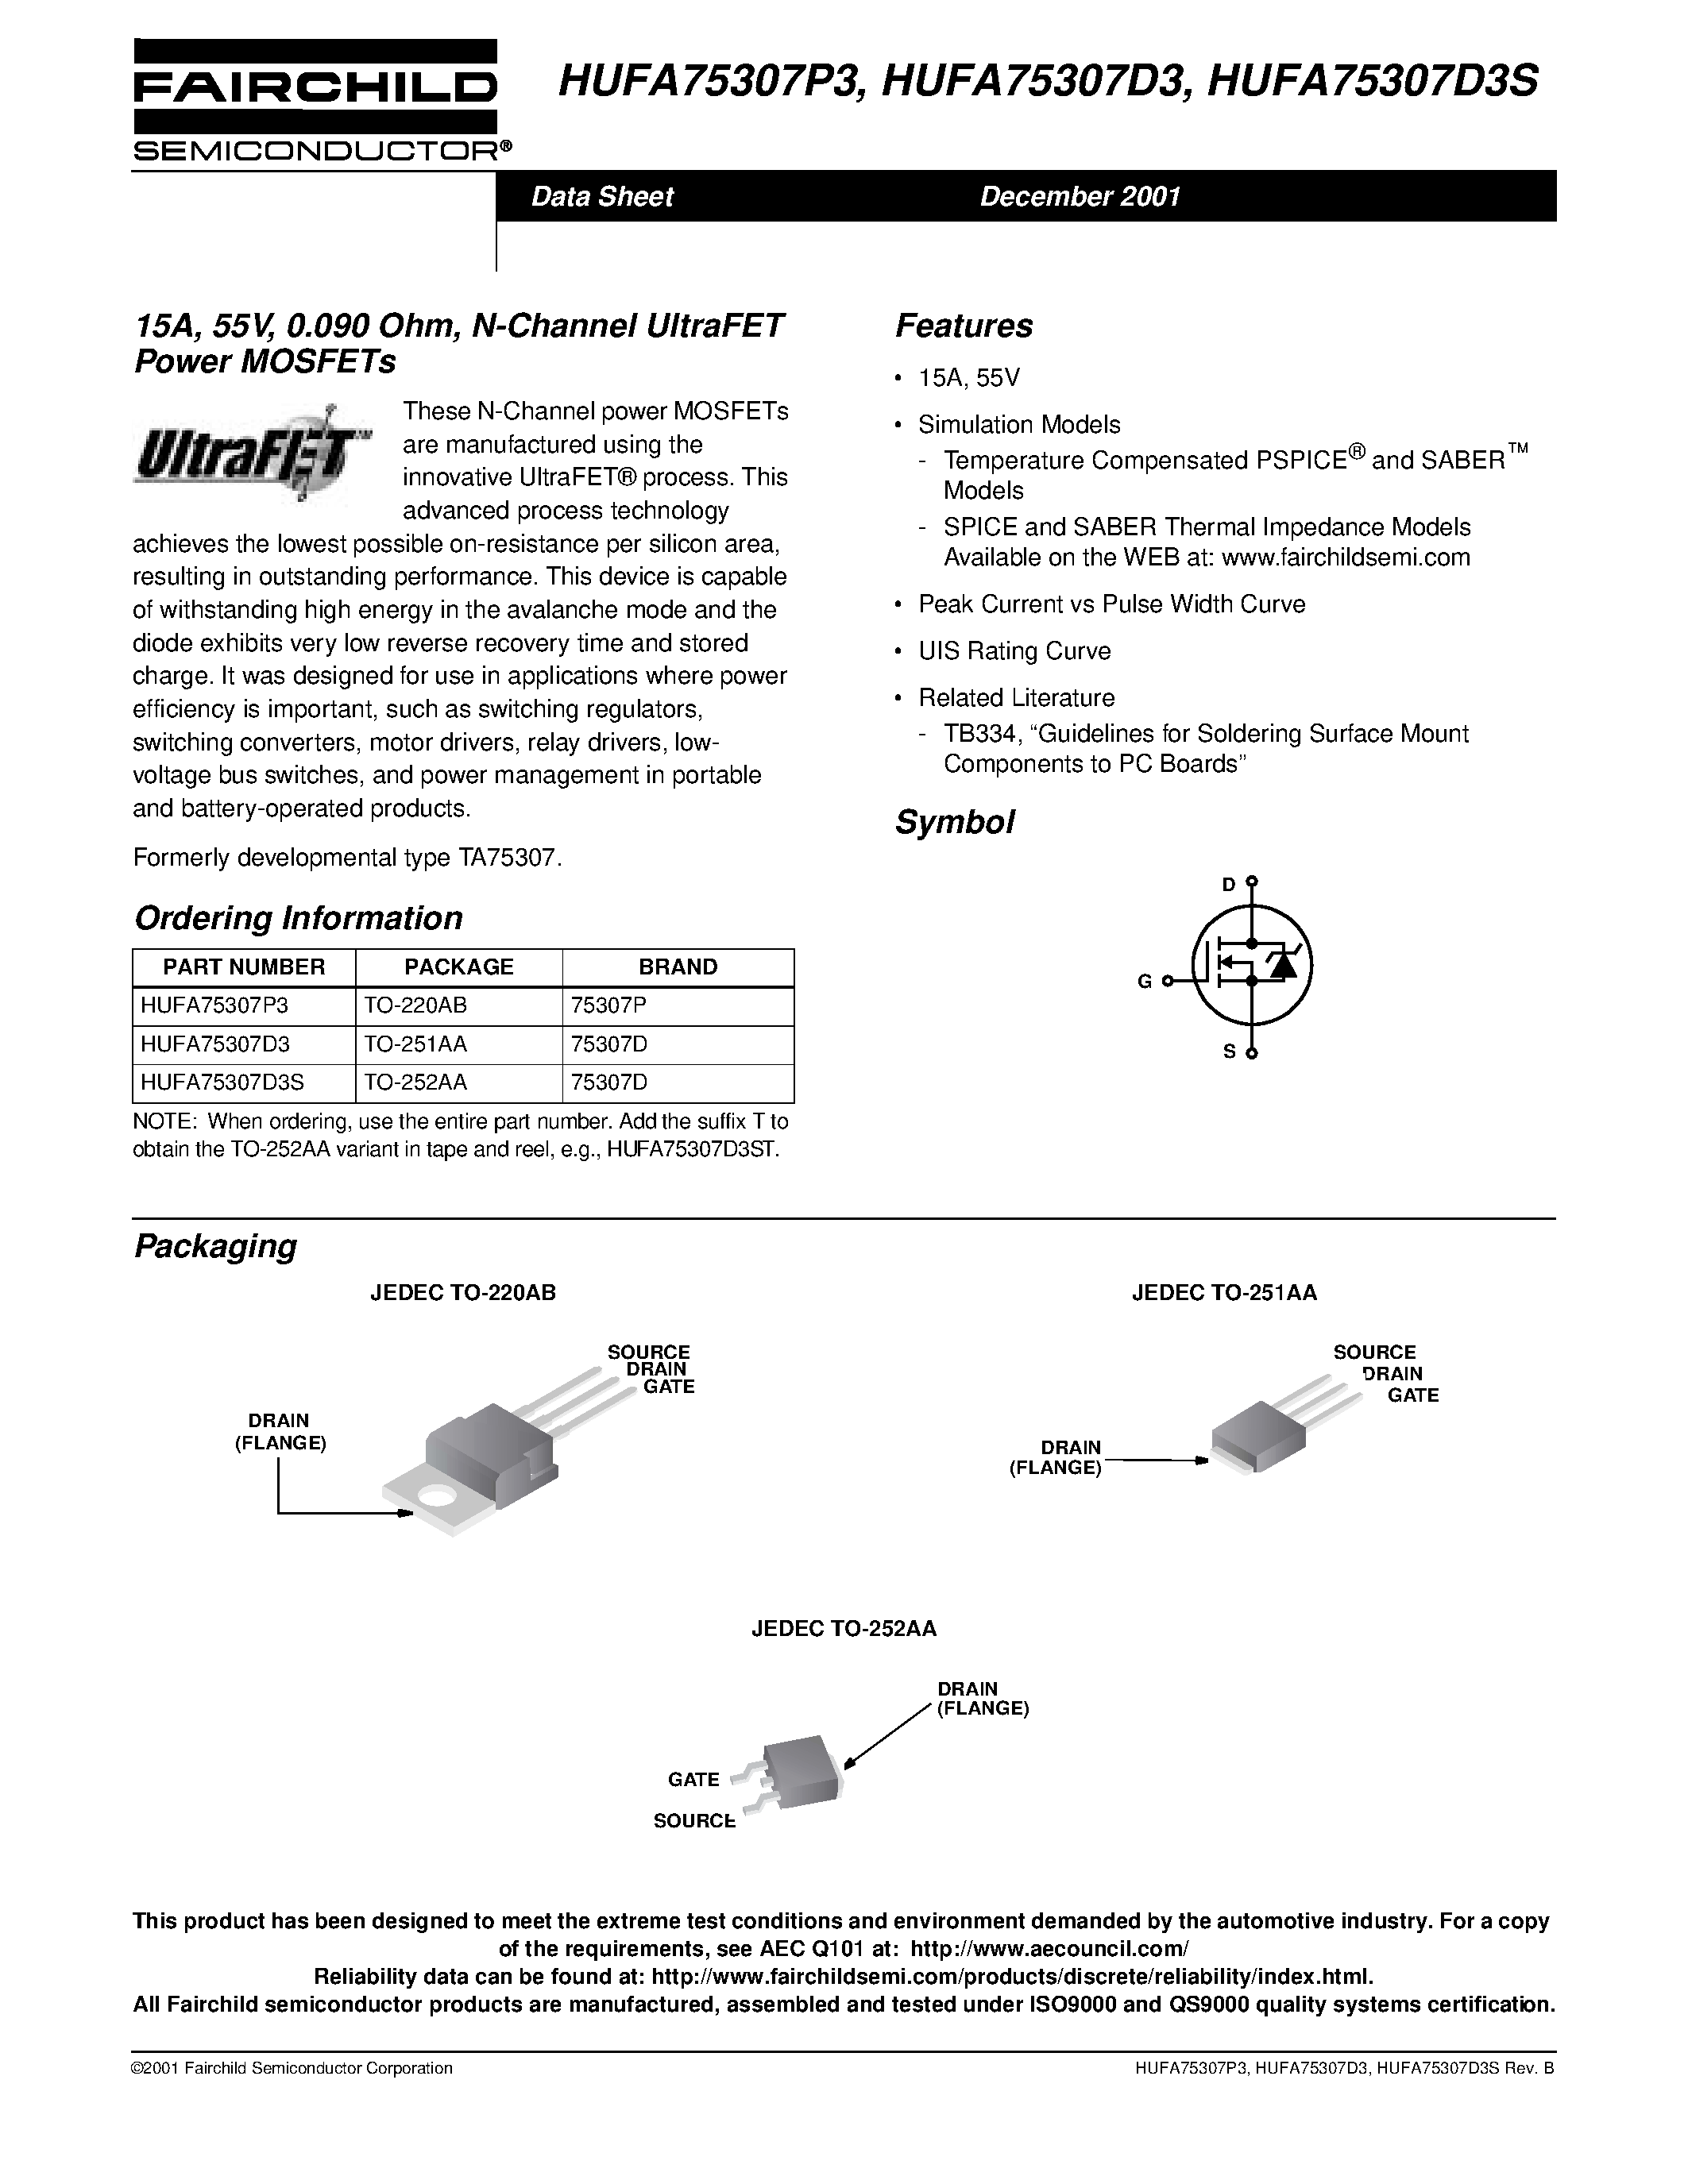 Datasheet HUFA75307D3S - 15A/ 55V/ 0.090 Ohm/ N-Channel UltraFET Power MOSFETs page 1